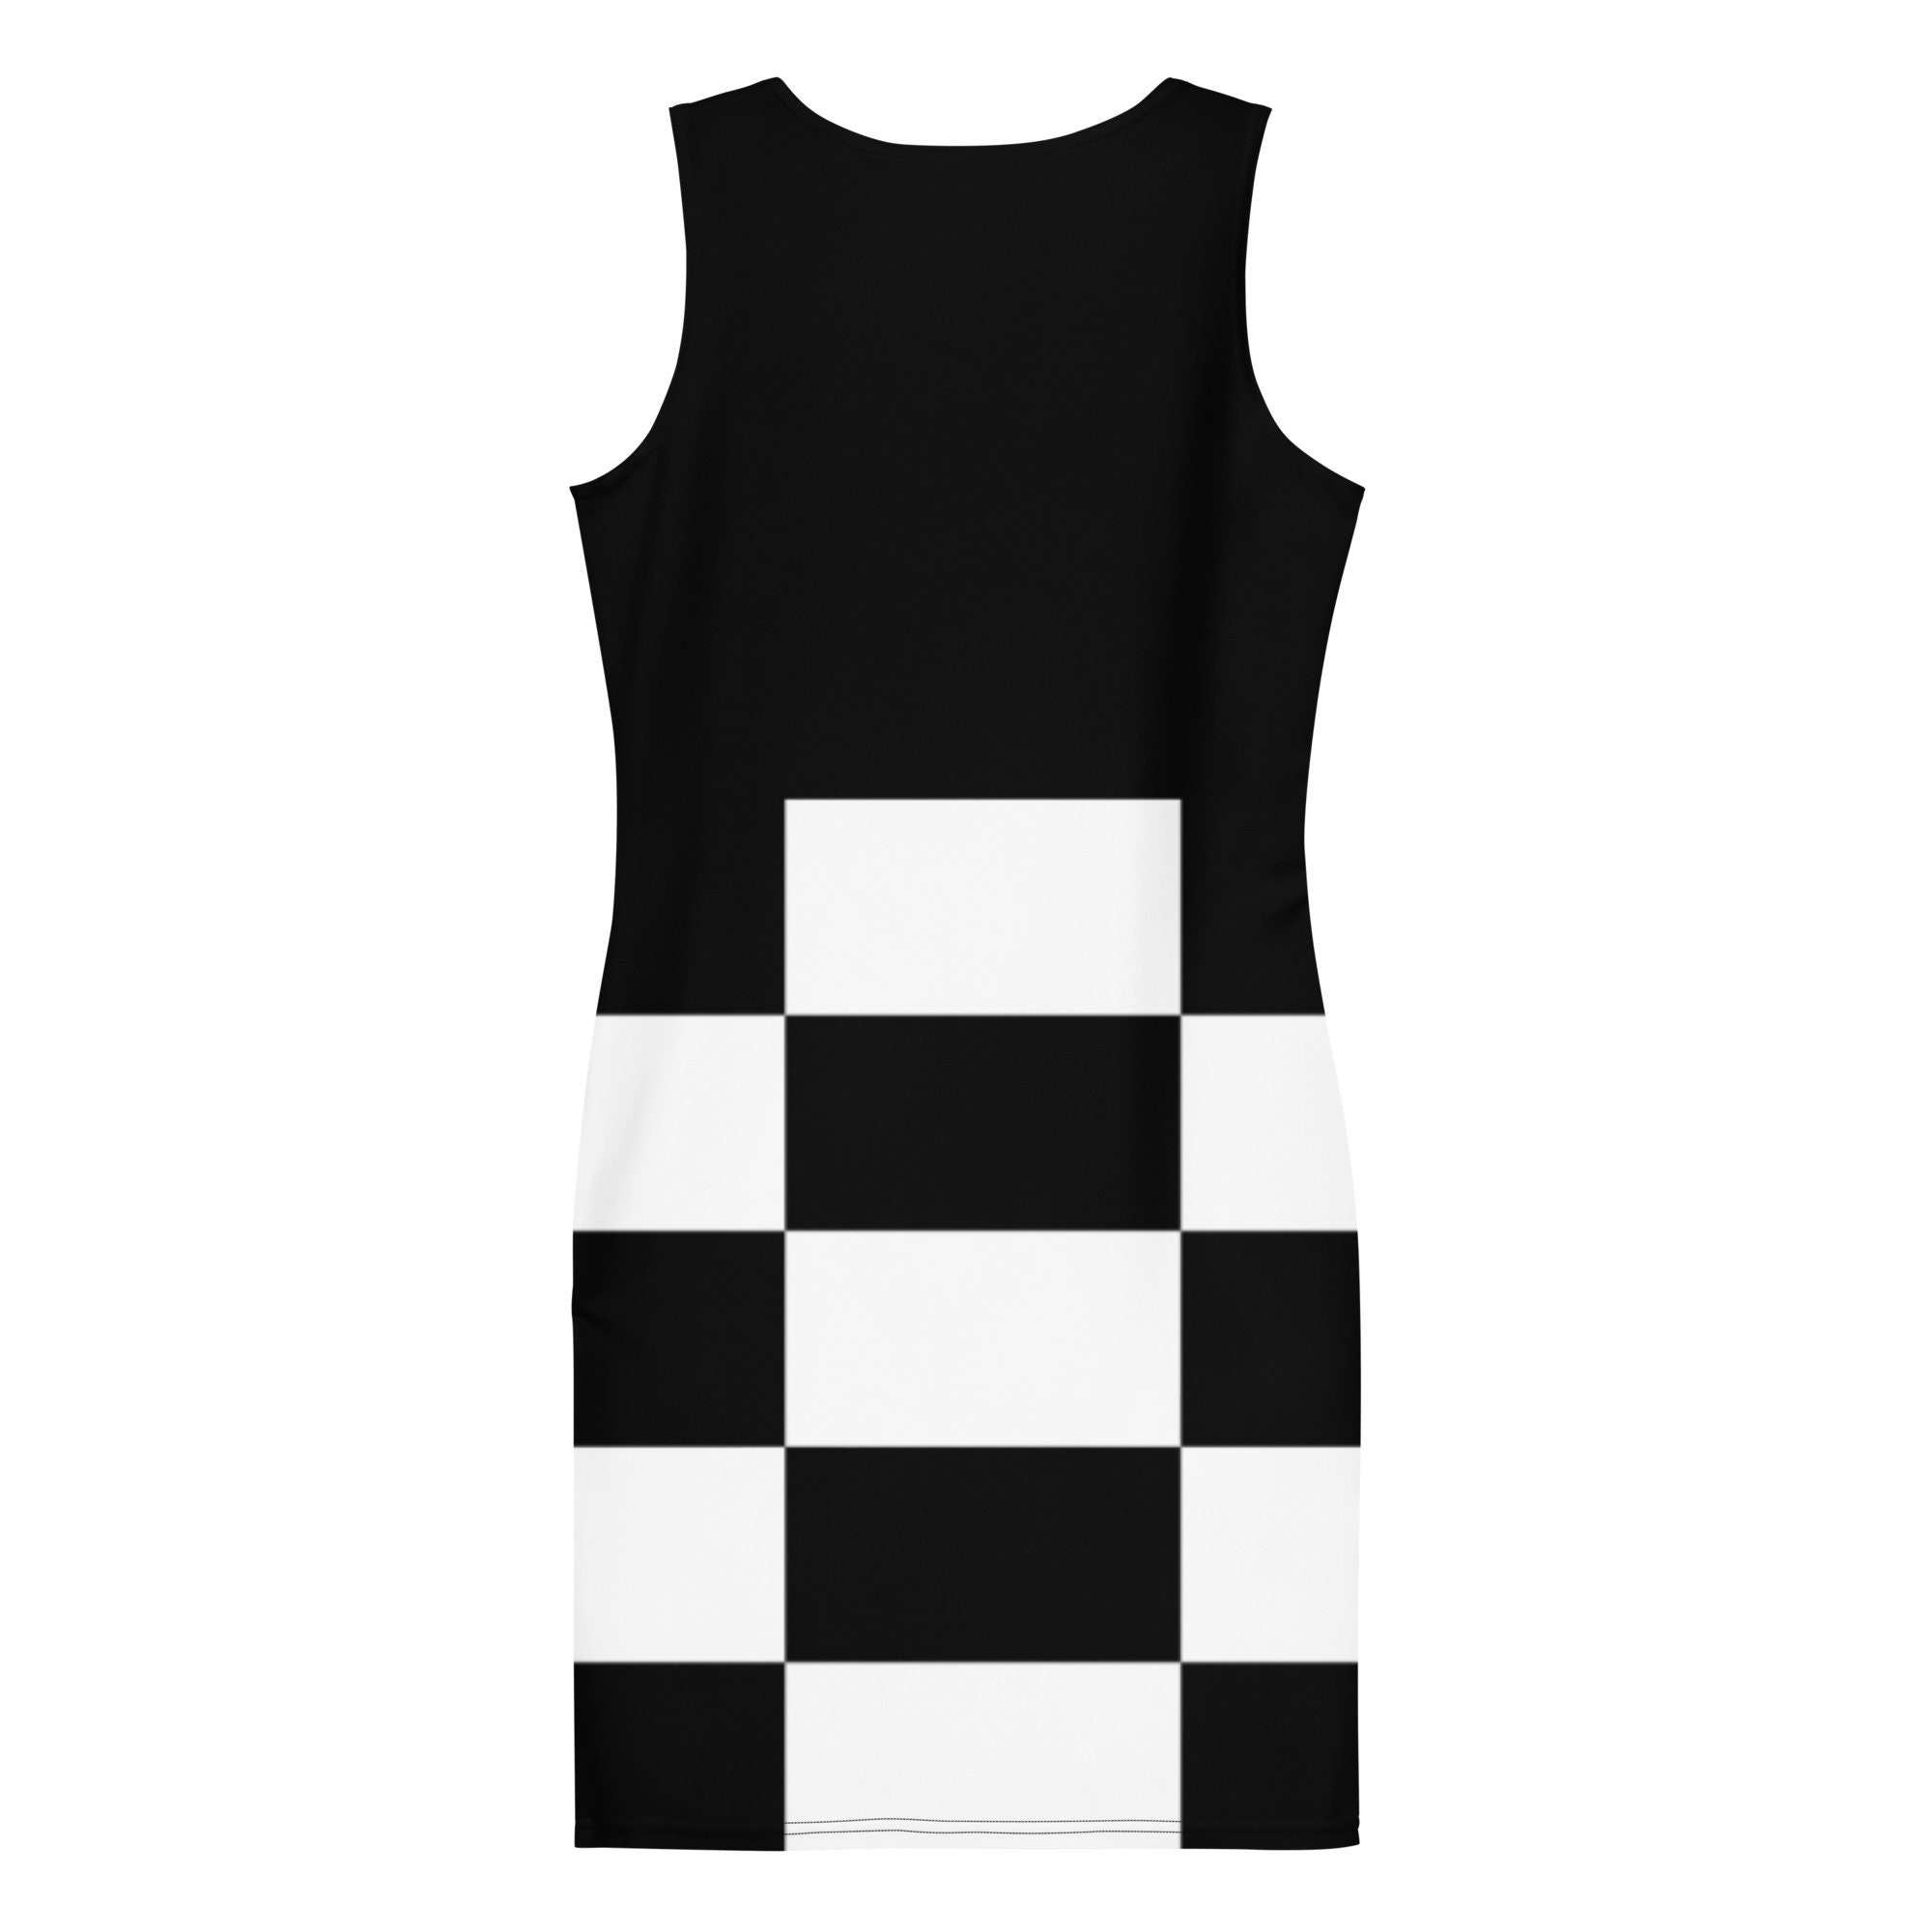 Black and White Check Dress , Black and White Checkered Dress , Checkered  Pattern Black and White Women's Sublimation Cut & Sew Dress - Etsy